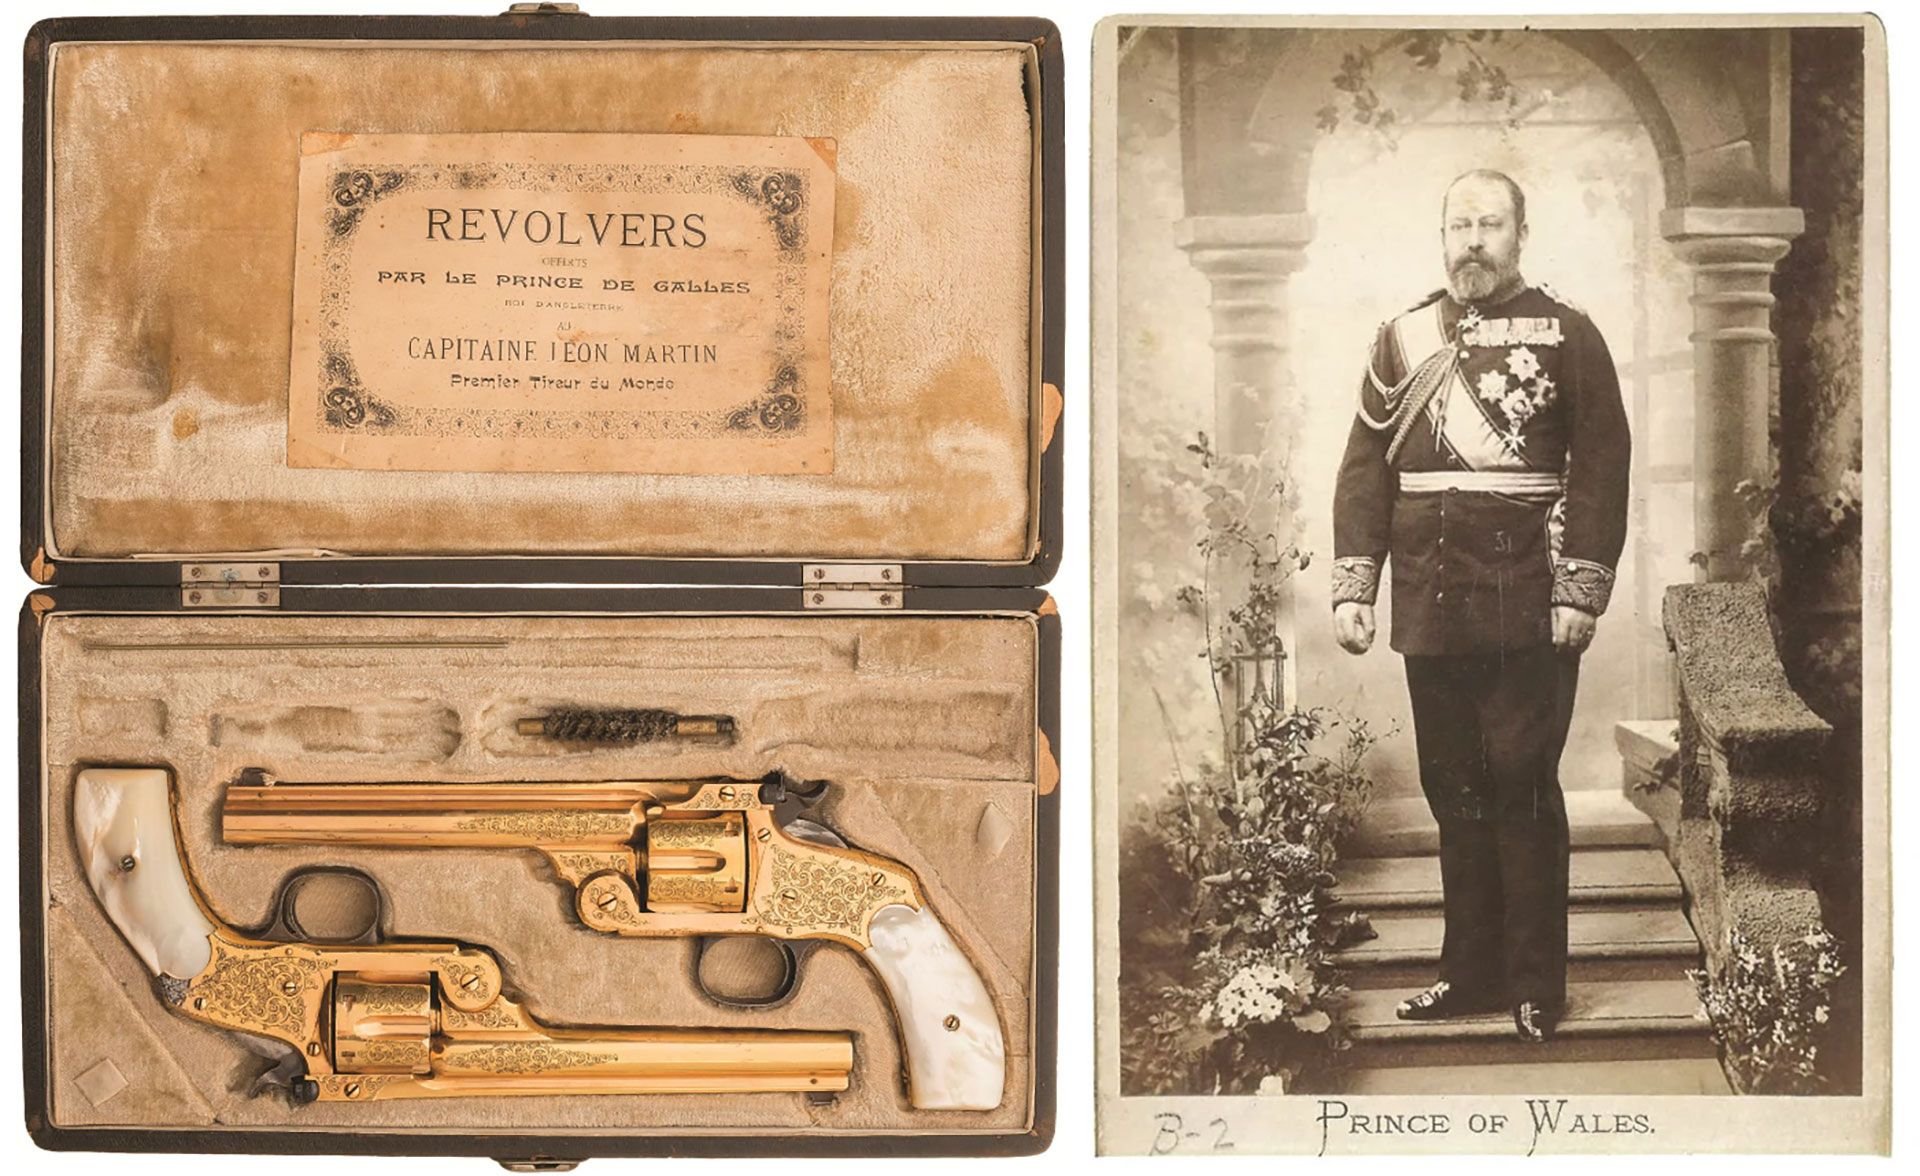 Two-Smith-Wesson-New-Model-3-Target-Revolvers-Presented-by-the-Prince-of-Wales